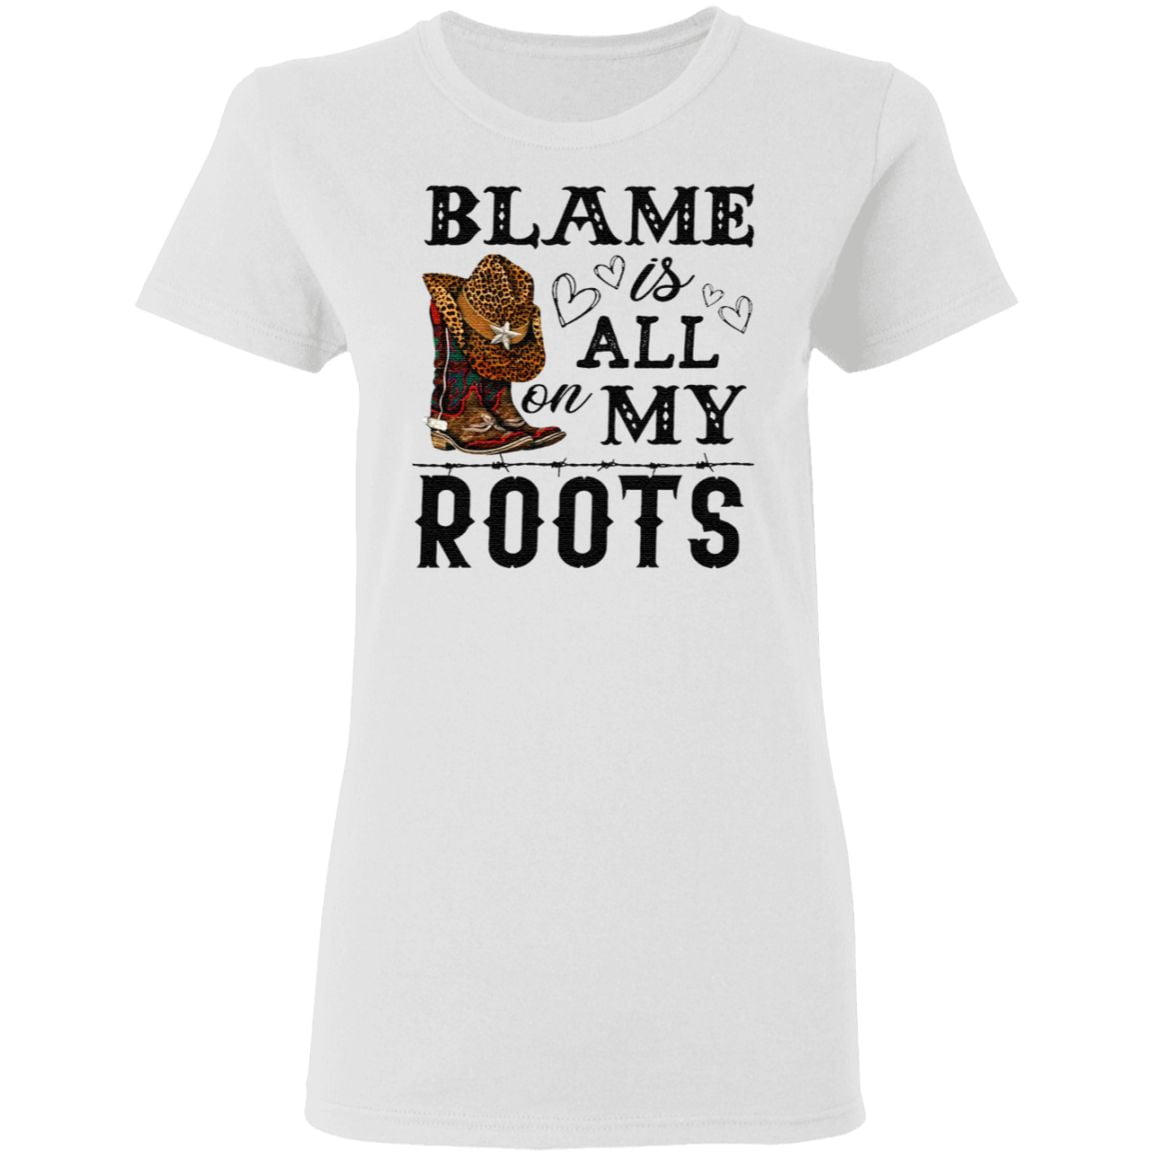 Blame is all my roots t shirt